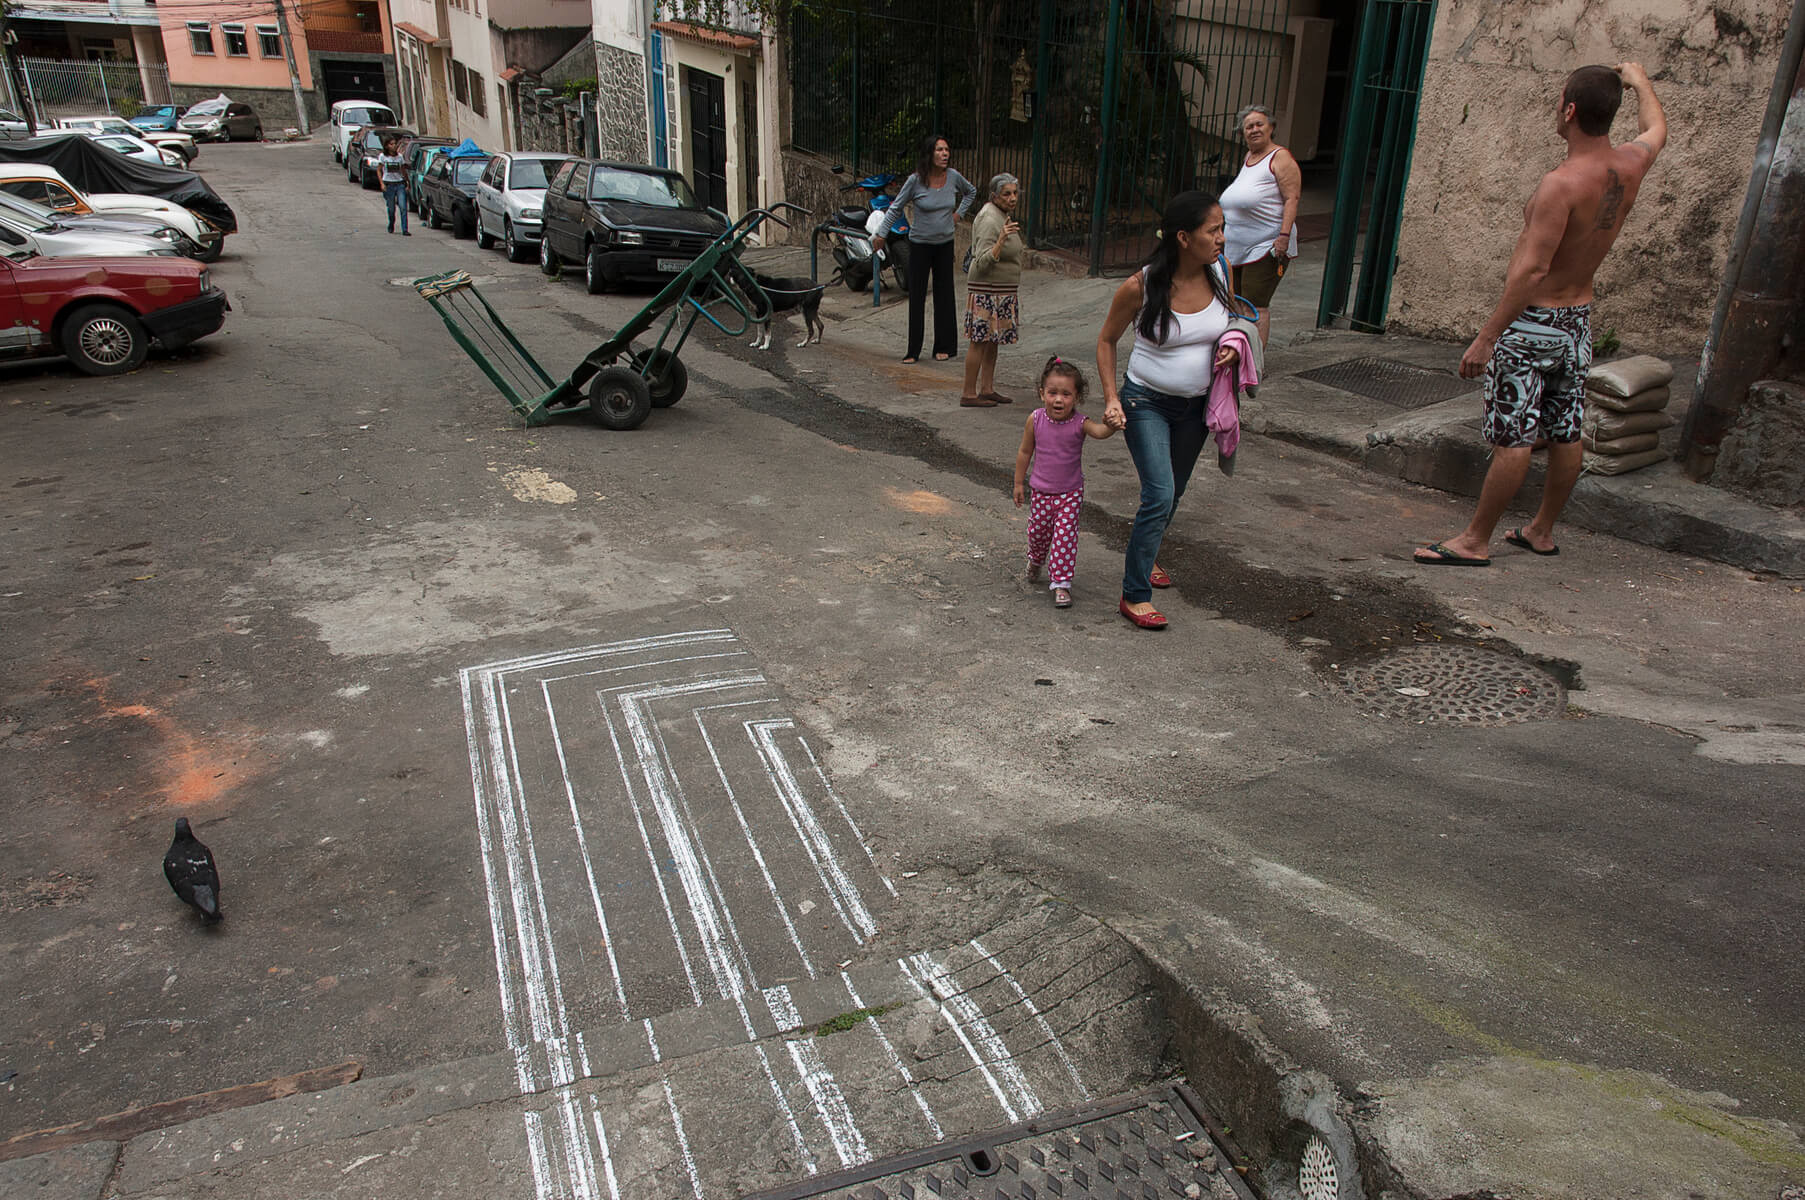 Chalk linedrawing on an also messy backstreet with people, a dog, a pigeon and a handcart in the middle of the street